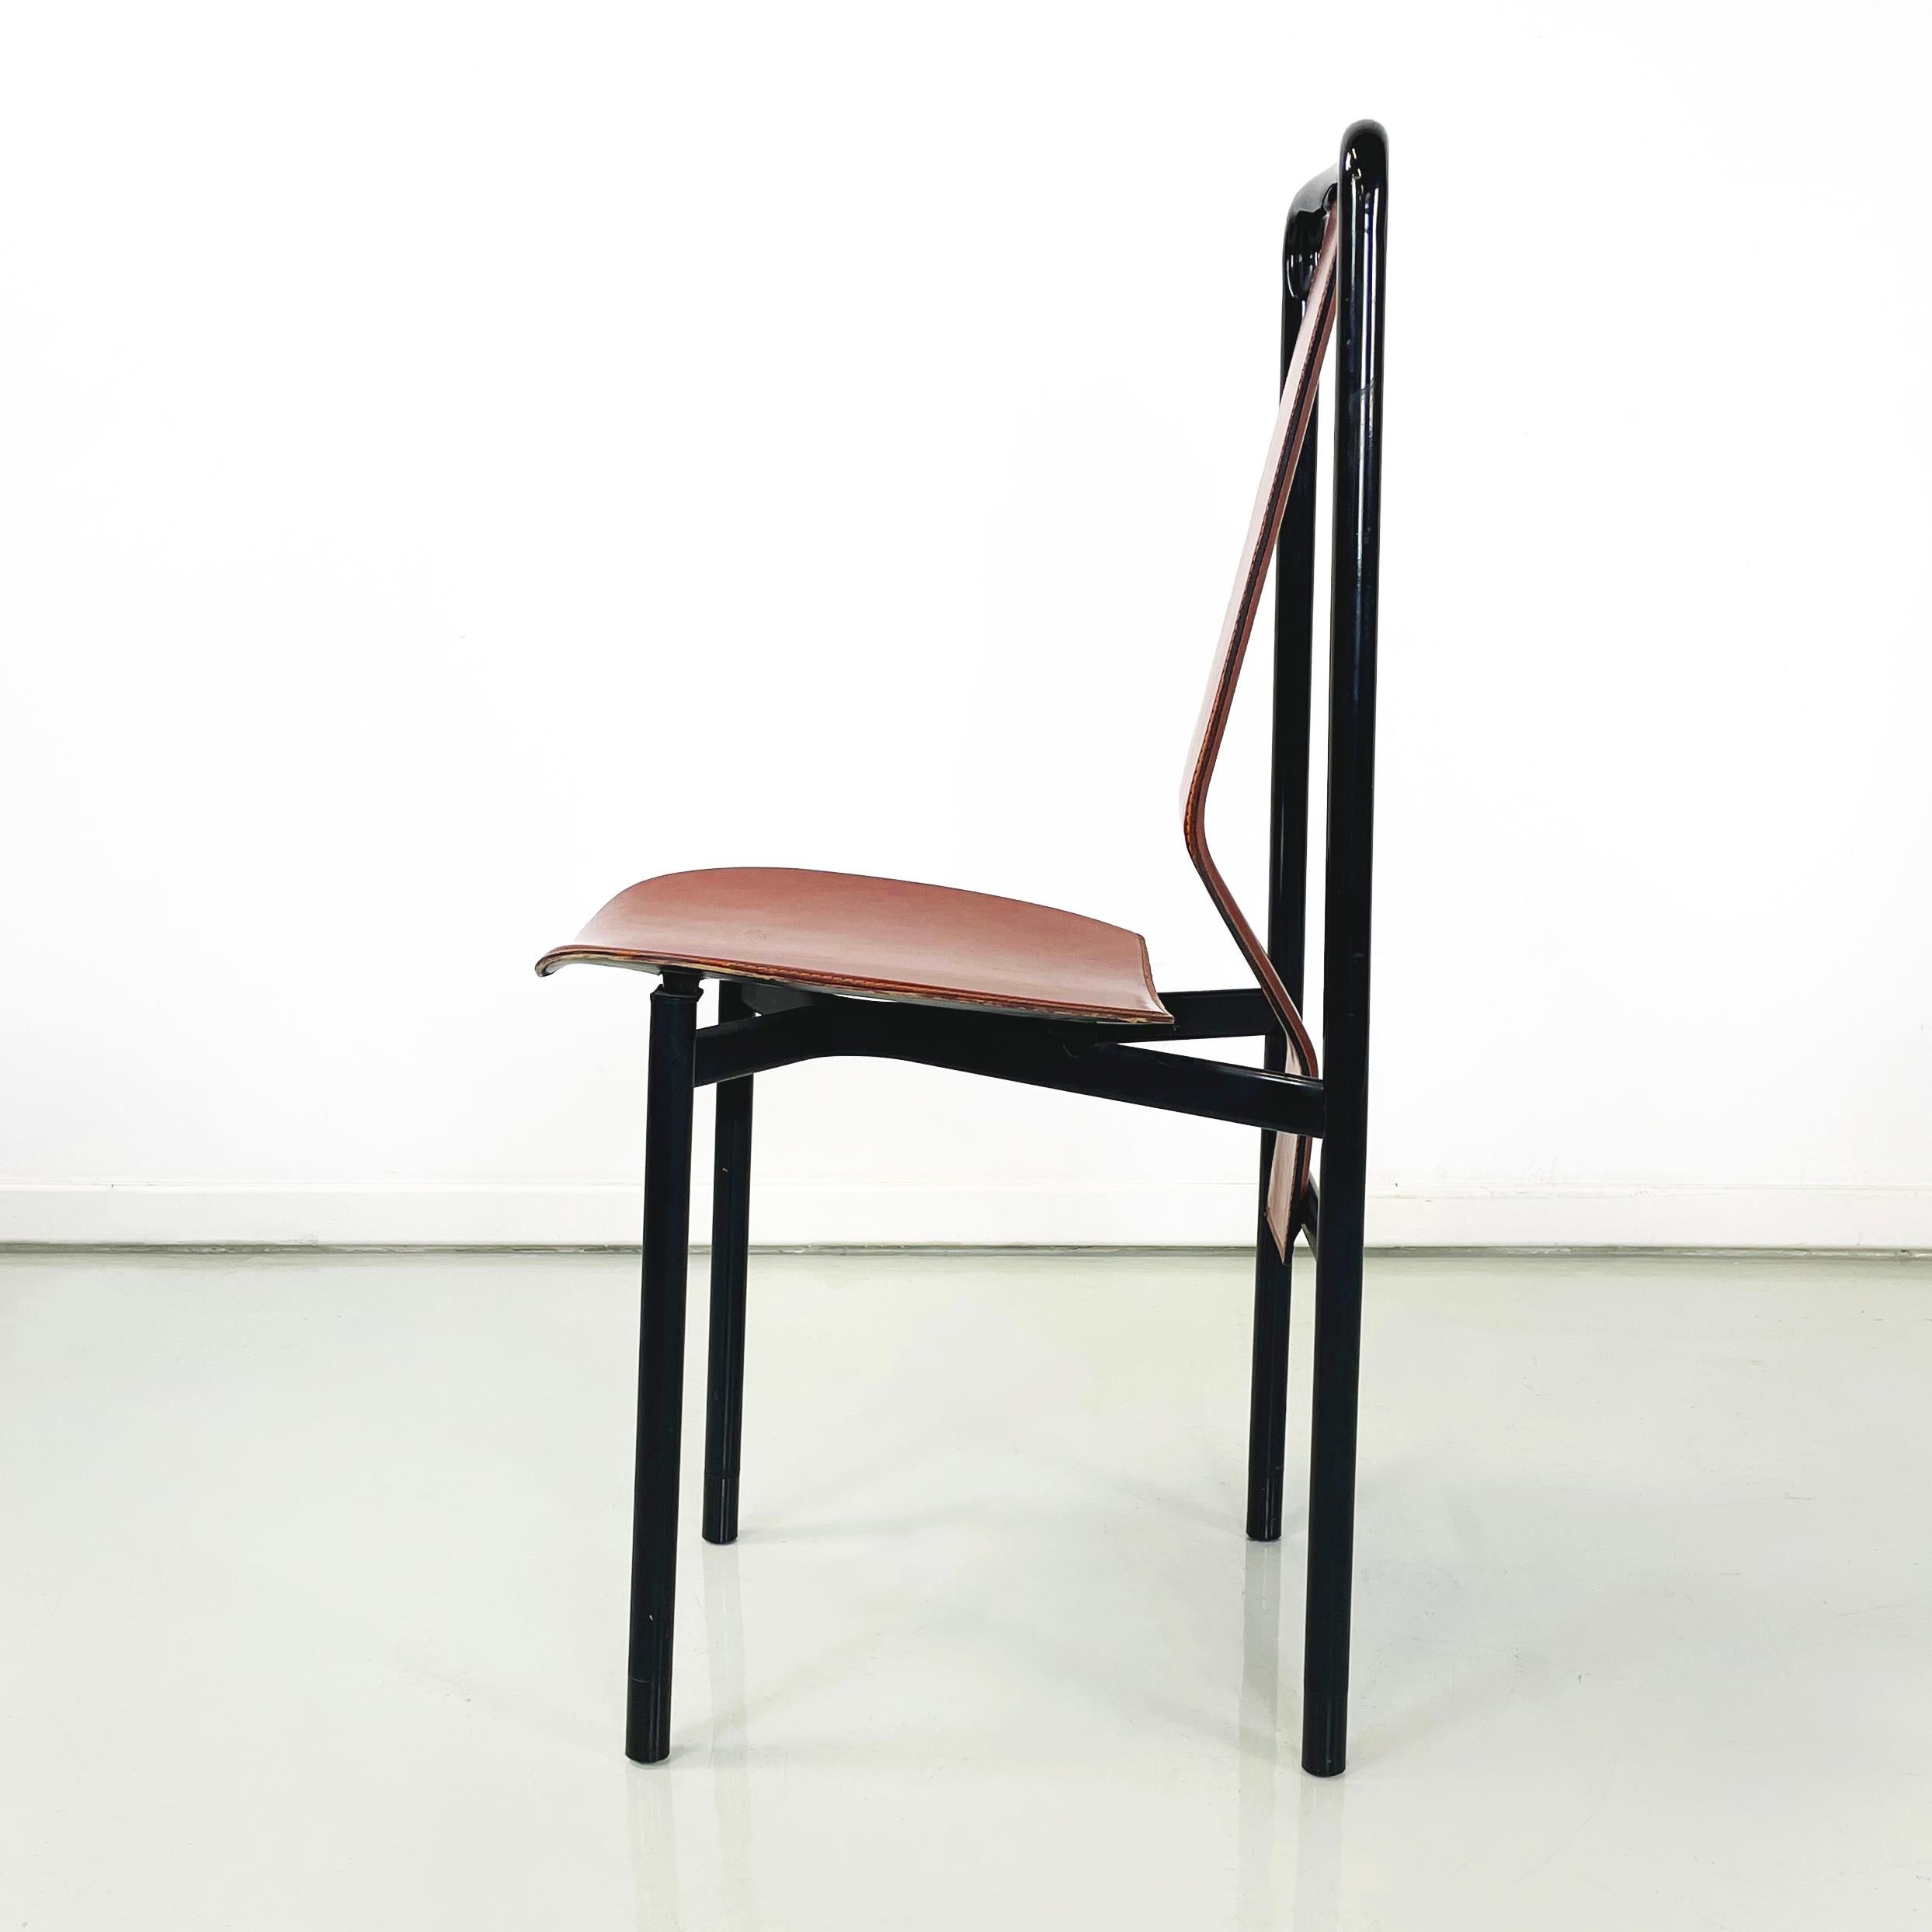 Late 20th Century Italian modern Brown leather Chairs Irma by Castiglioni for Zanotta, 1970s For Sale